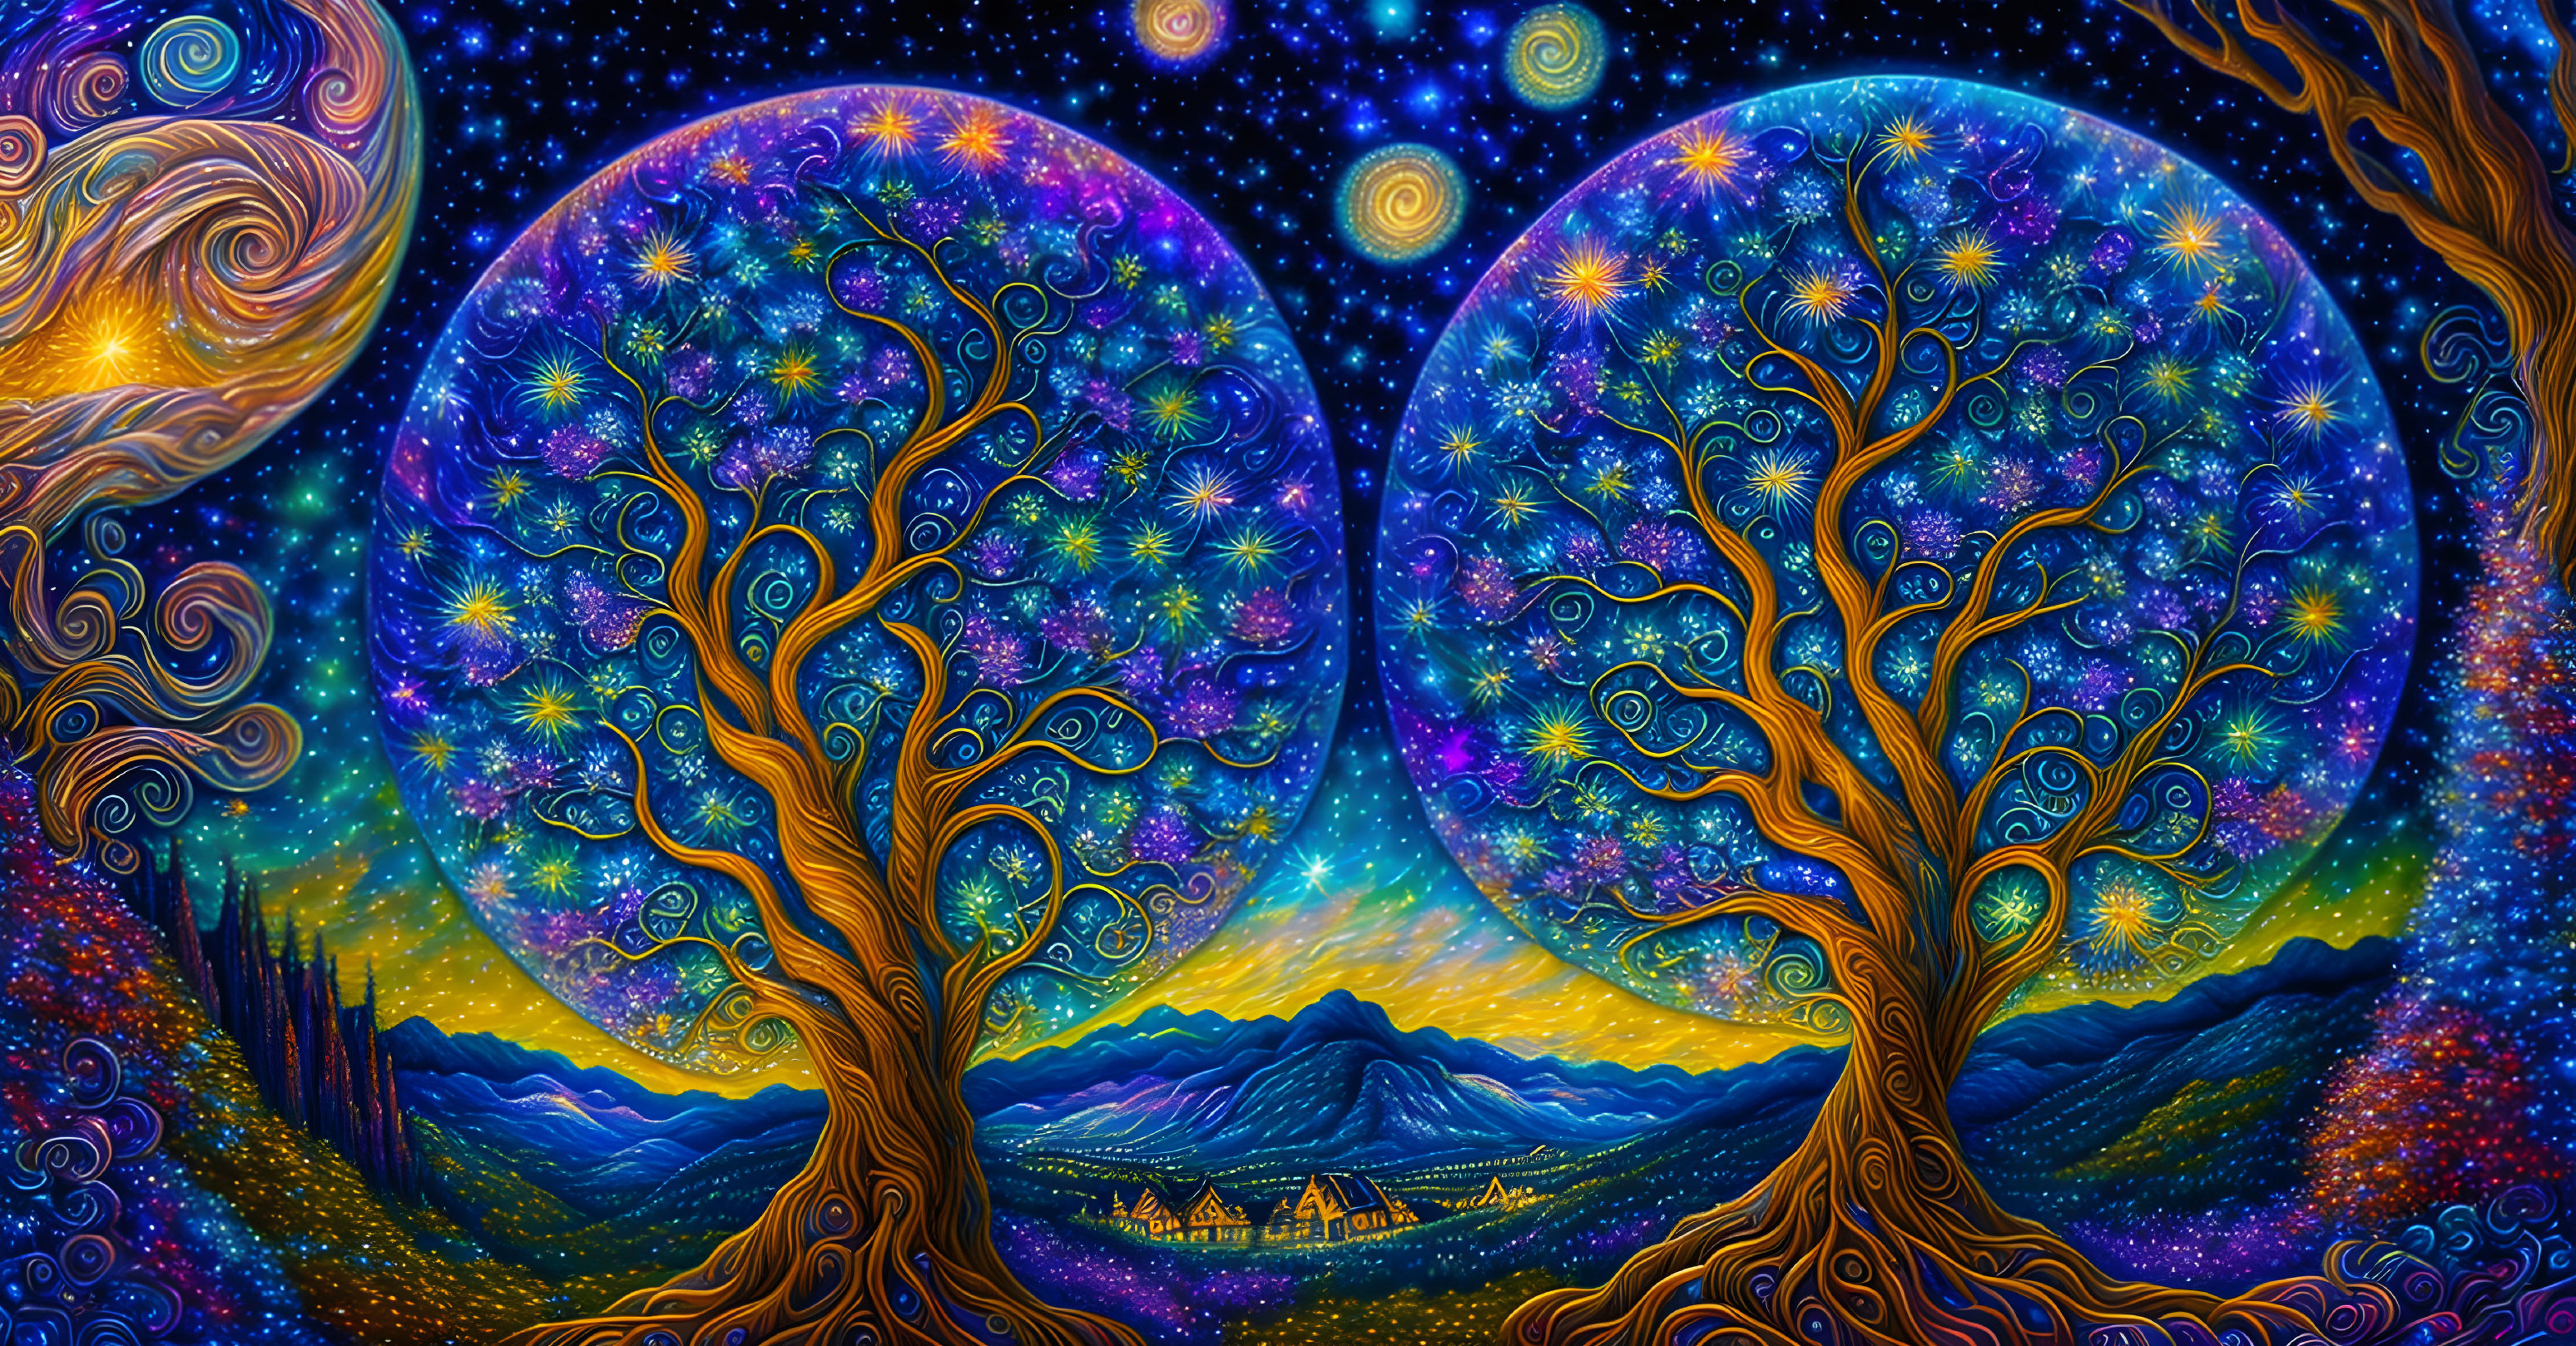 Surreal trees